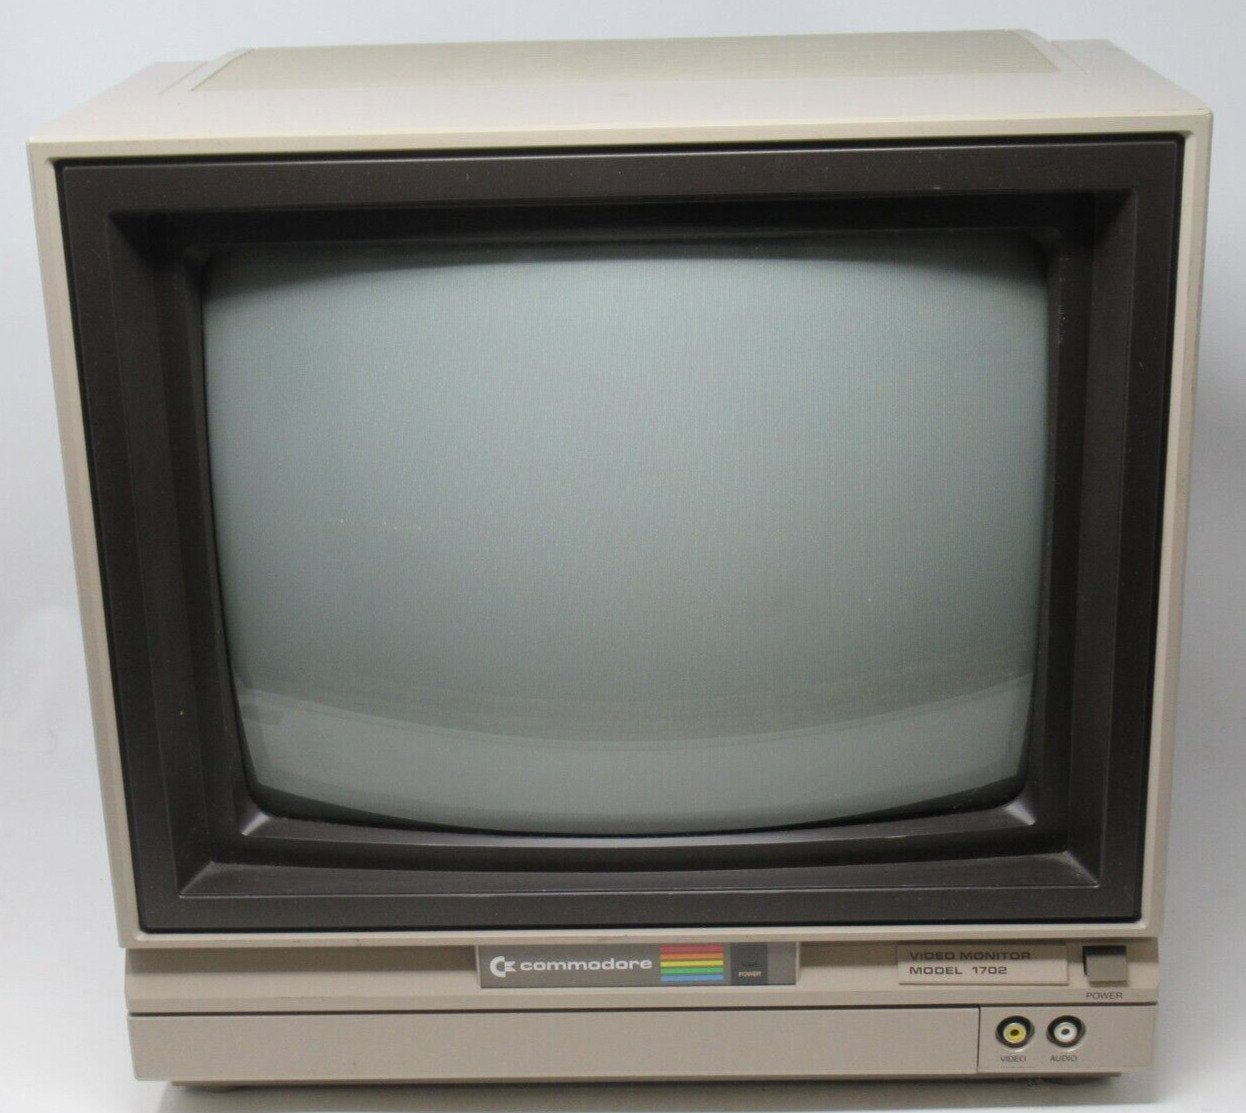 VINTAGE COMMODORE CRT COLOR VIDEO MONITOR 1702, BUILT-IN SPEAKERS RETRO GAMING